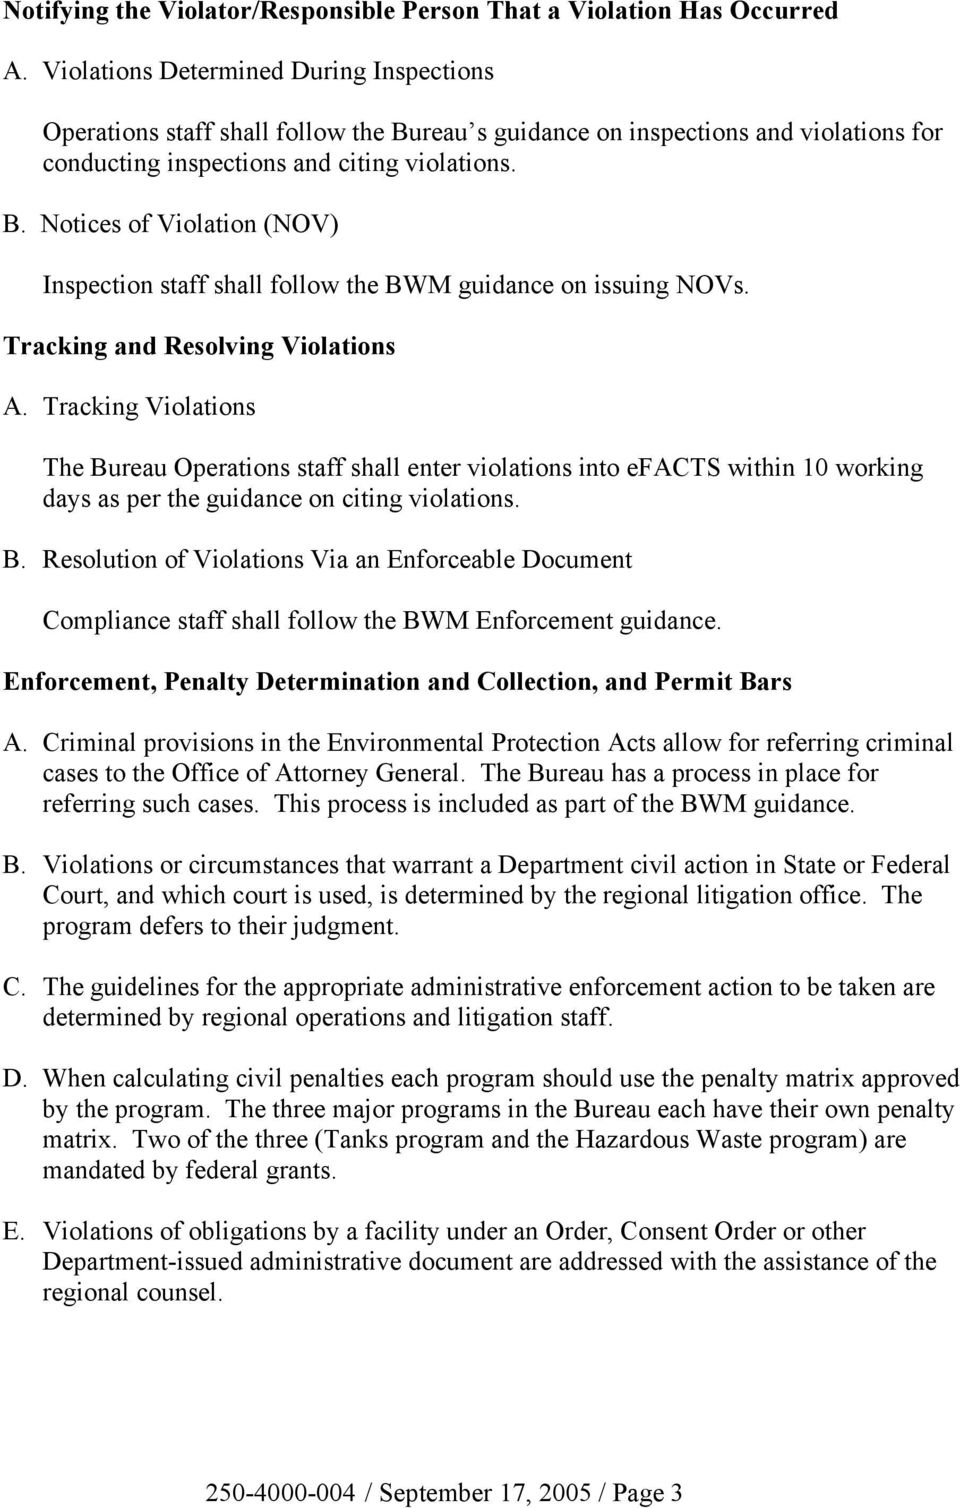 Tracking and Resolving Violations A. Tracking Violations The Bureau Operations staff shall enter violations into efacts within 10 working days as per the guidance on citing violations. B. Resolution of Violations Via an Enforceable Document Compliance staff shall follow the BWM Enforcement guidance.